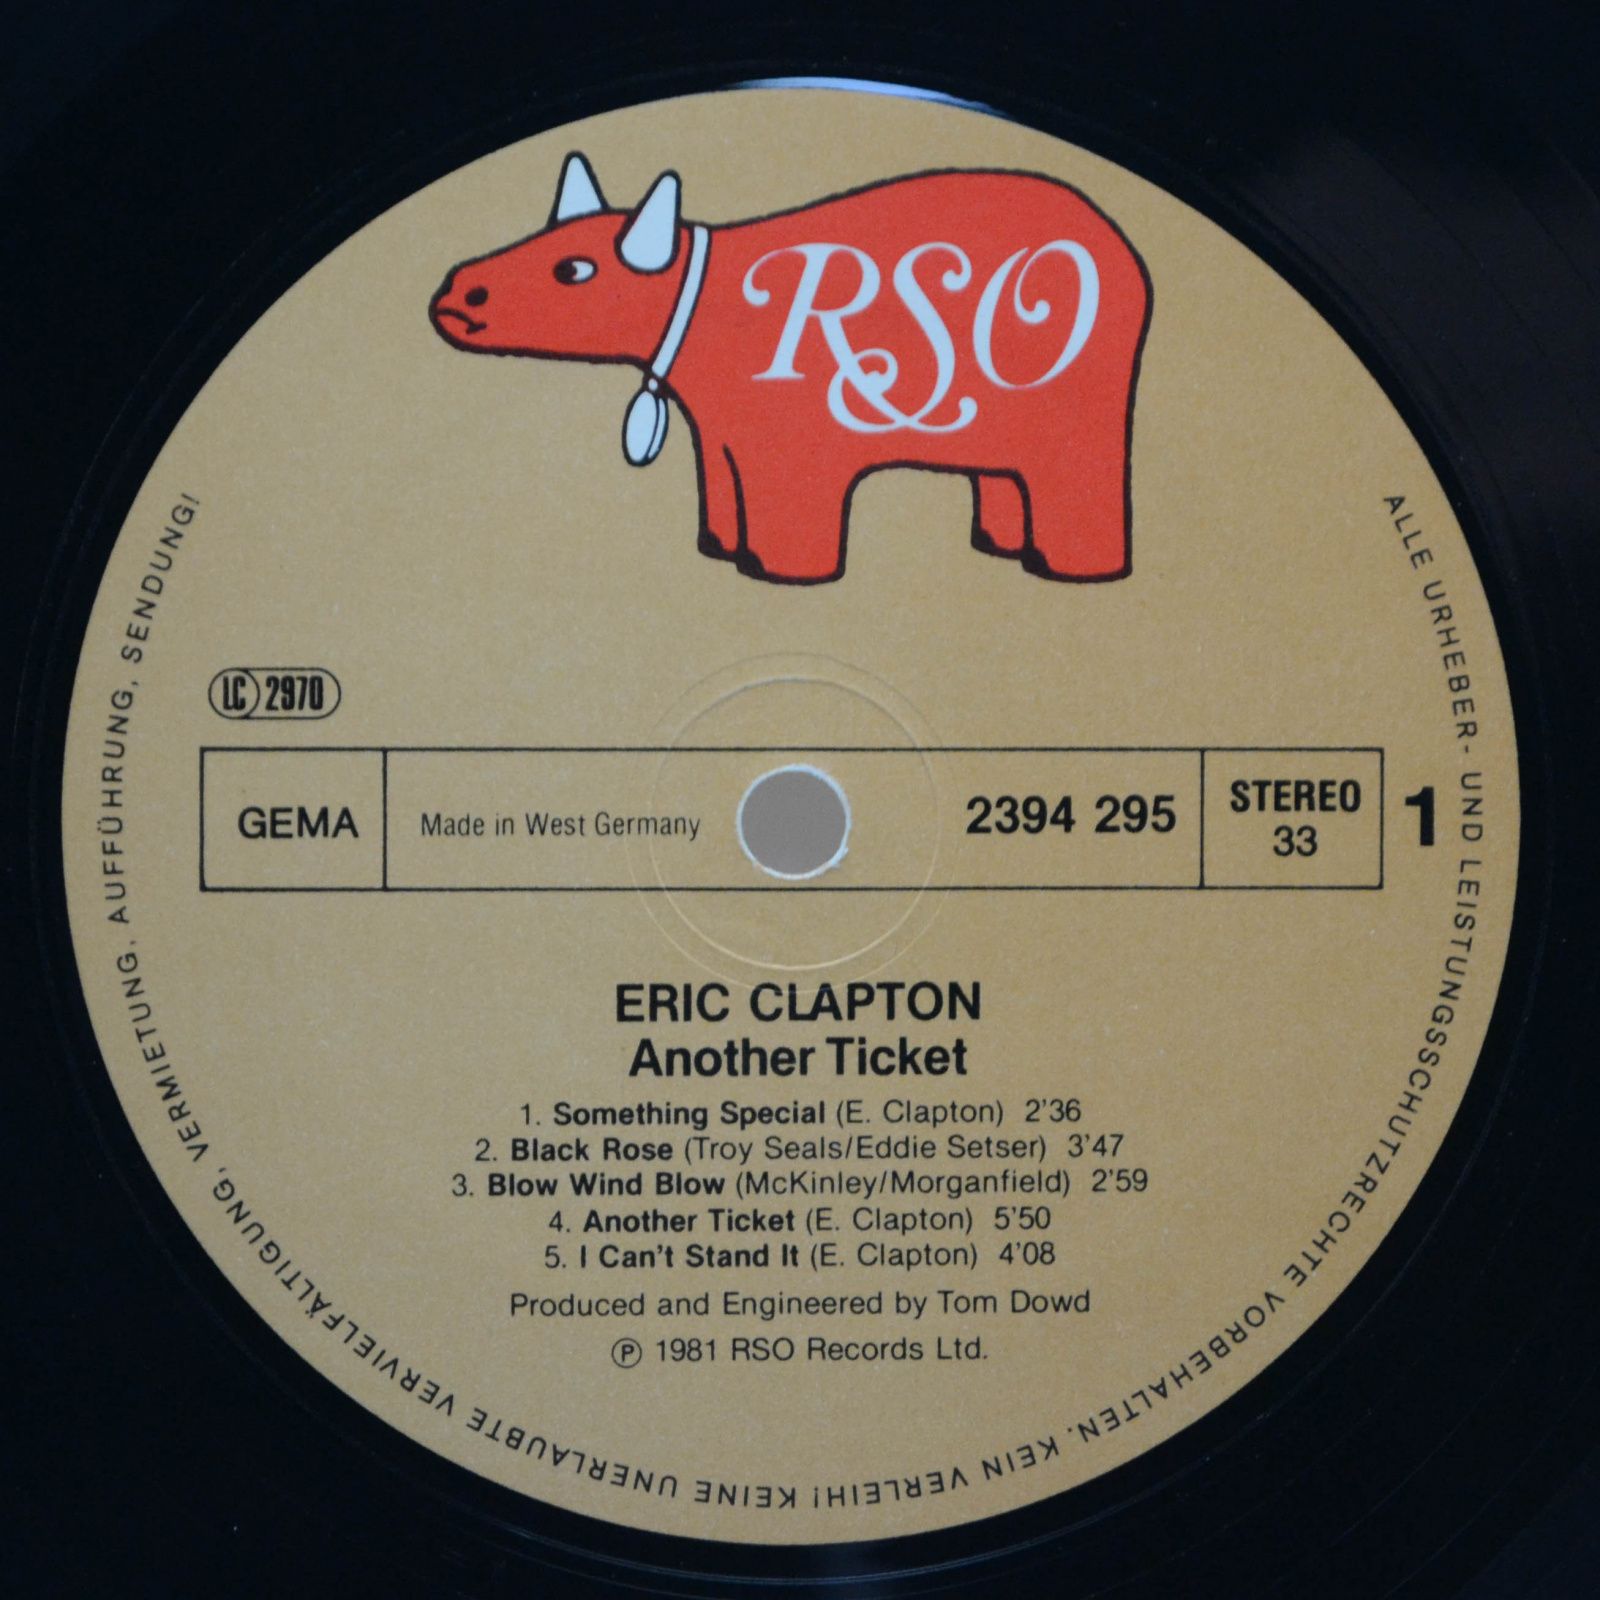 Eric Clapton — Another Ticket, 1981